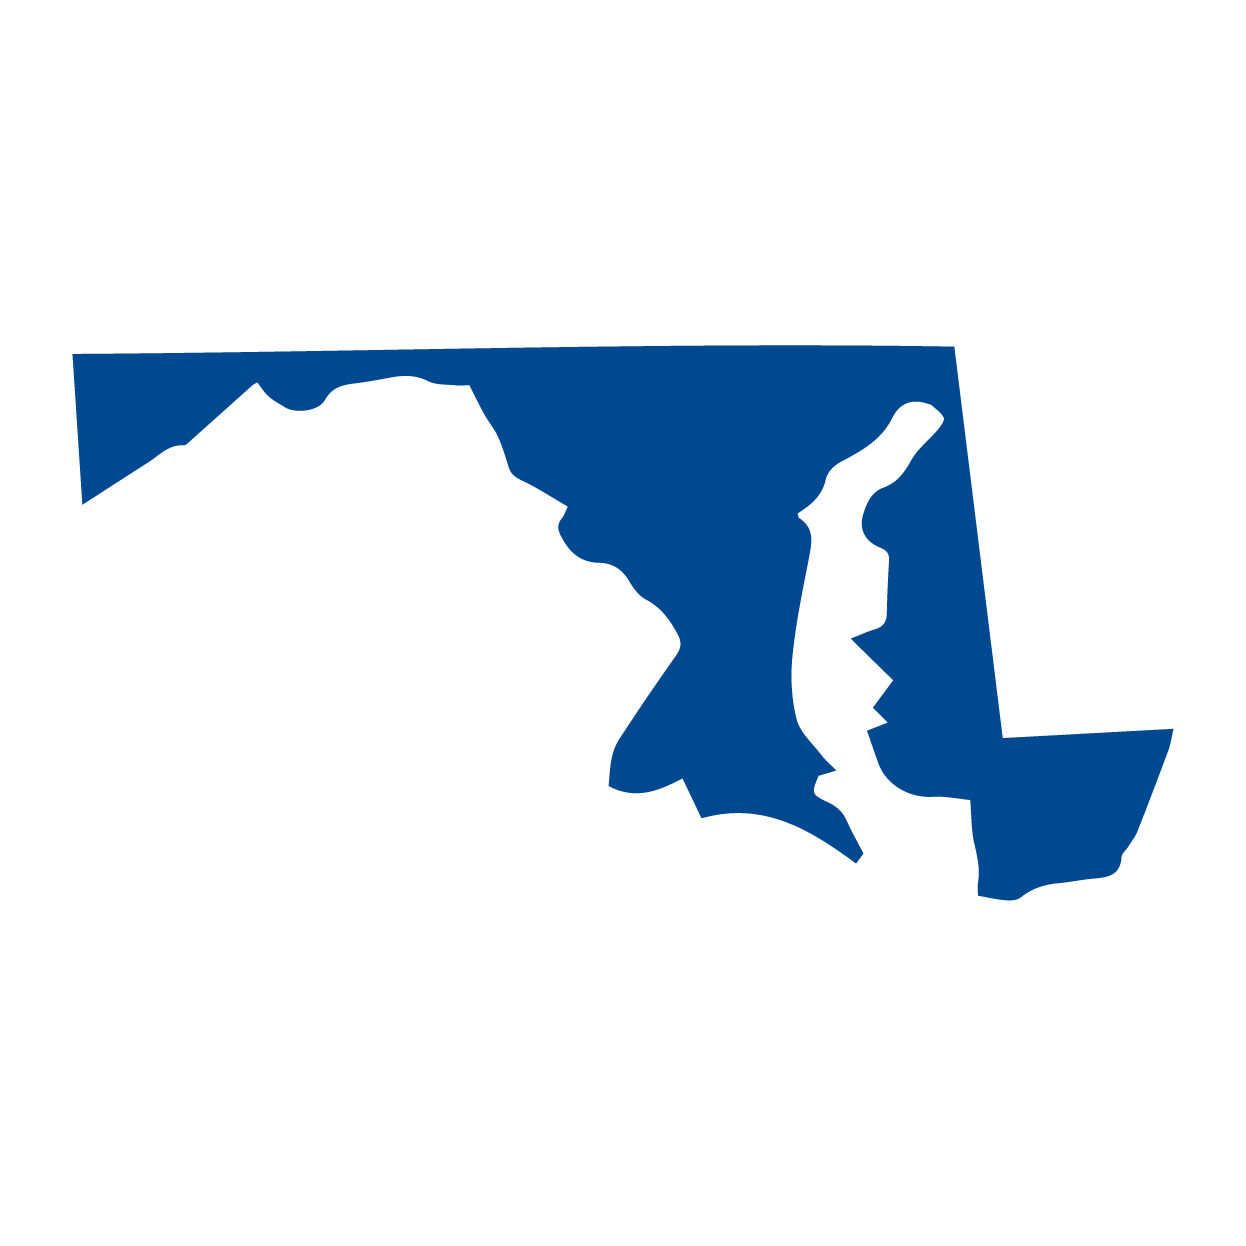 State Services Link - blue silhouette of Maryland